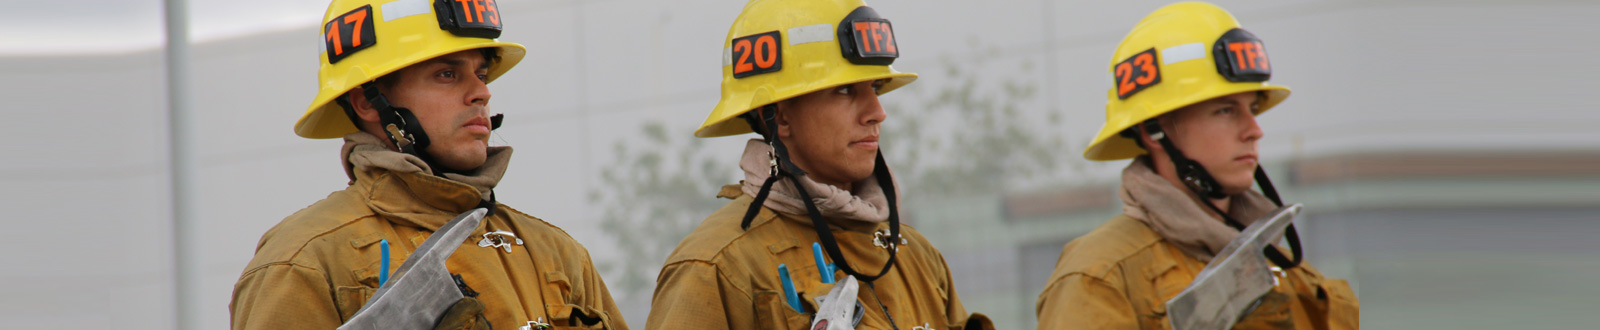 Fire protection jobs los angeles